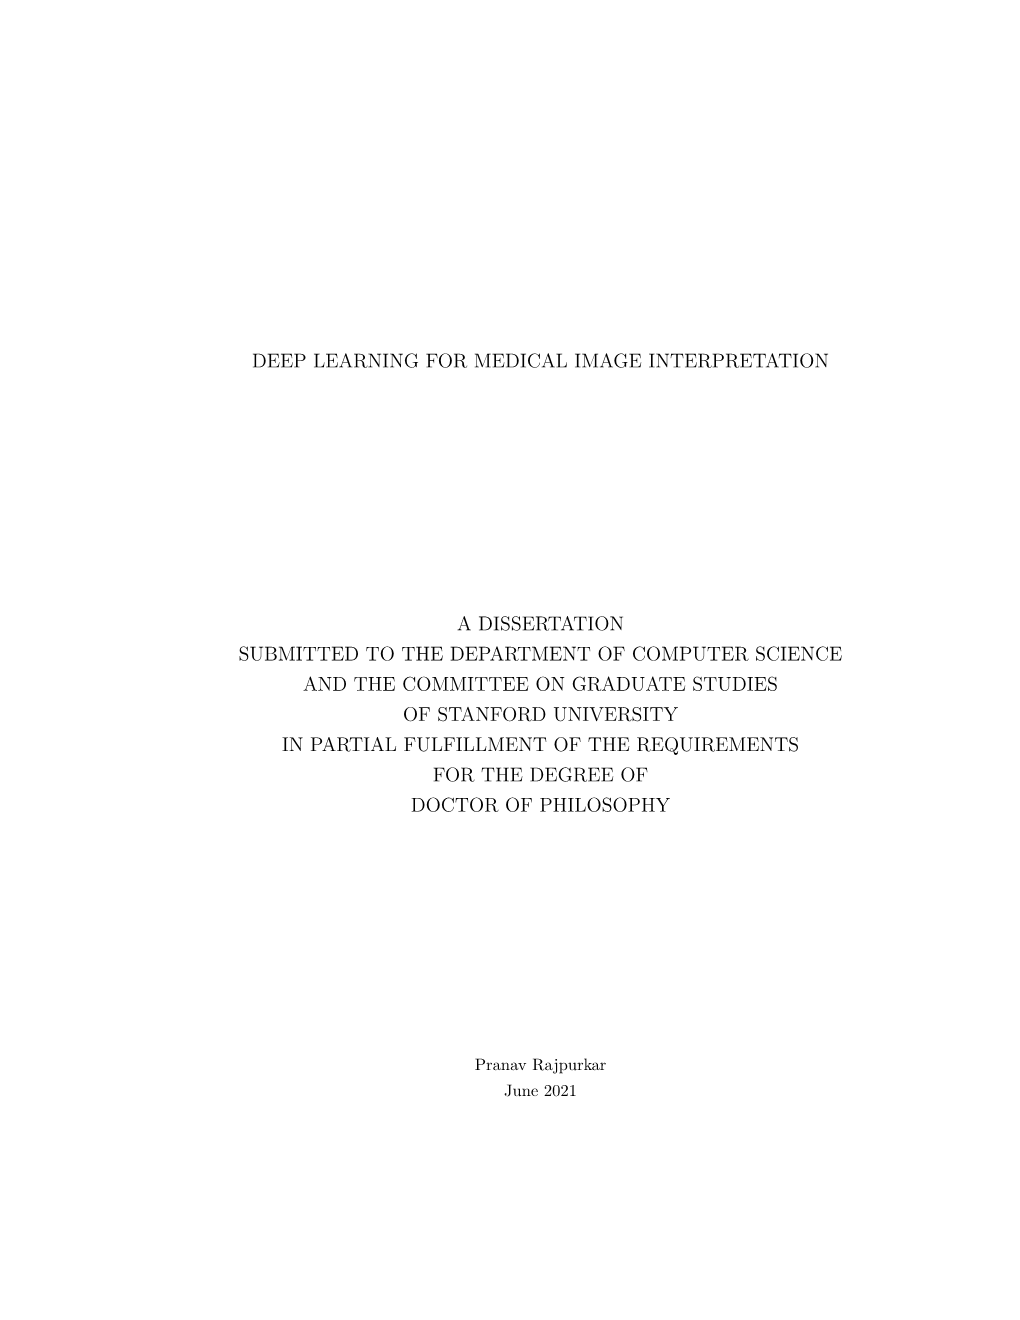 Thesis, I Describe Three Key Direc- Tions That Present Challenges and Opportunities for the Development of Deep Learning Technologies for Medical Image Interpretation